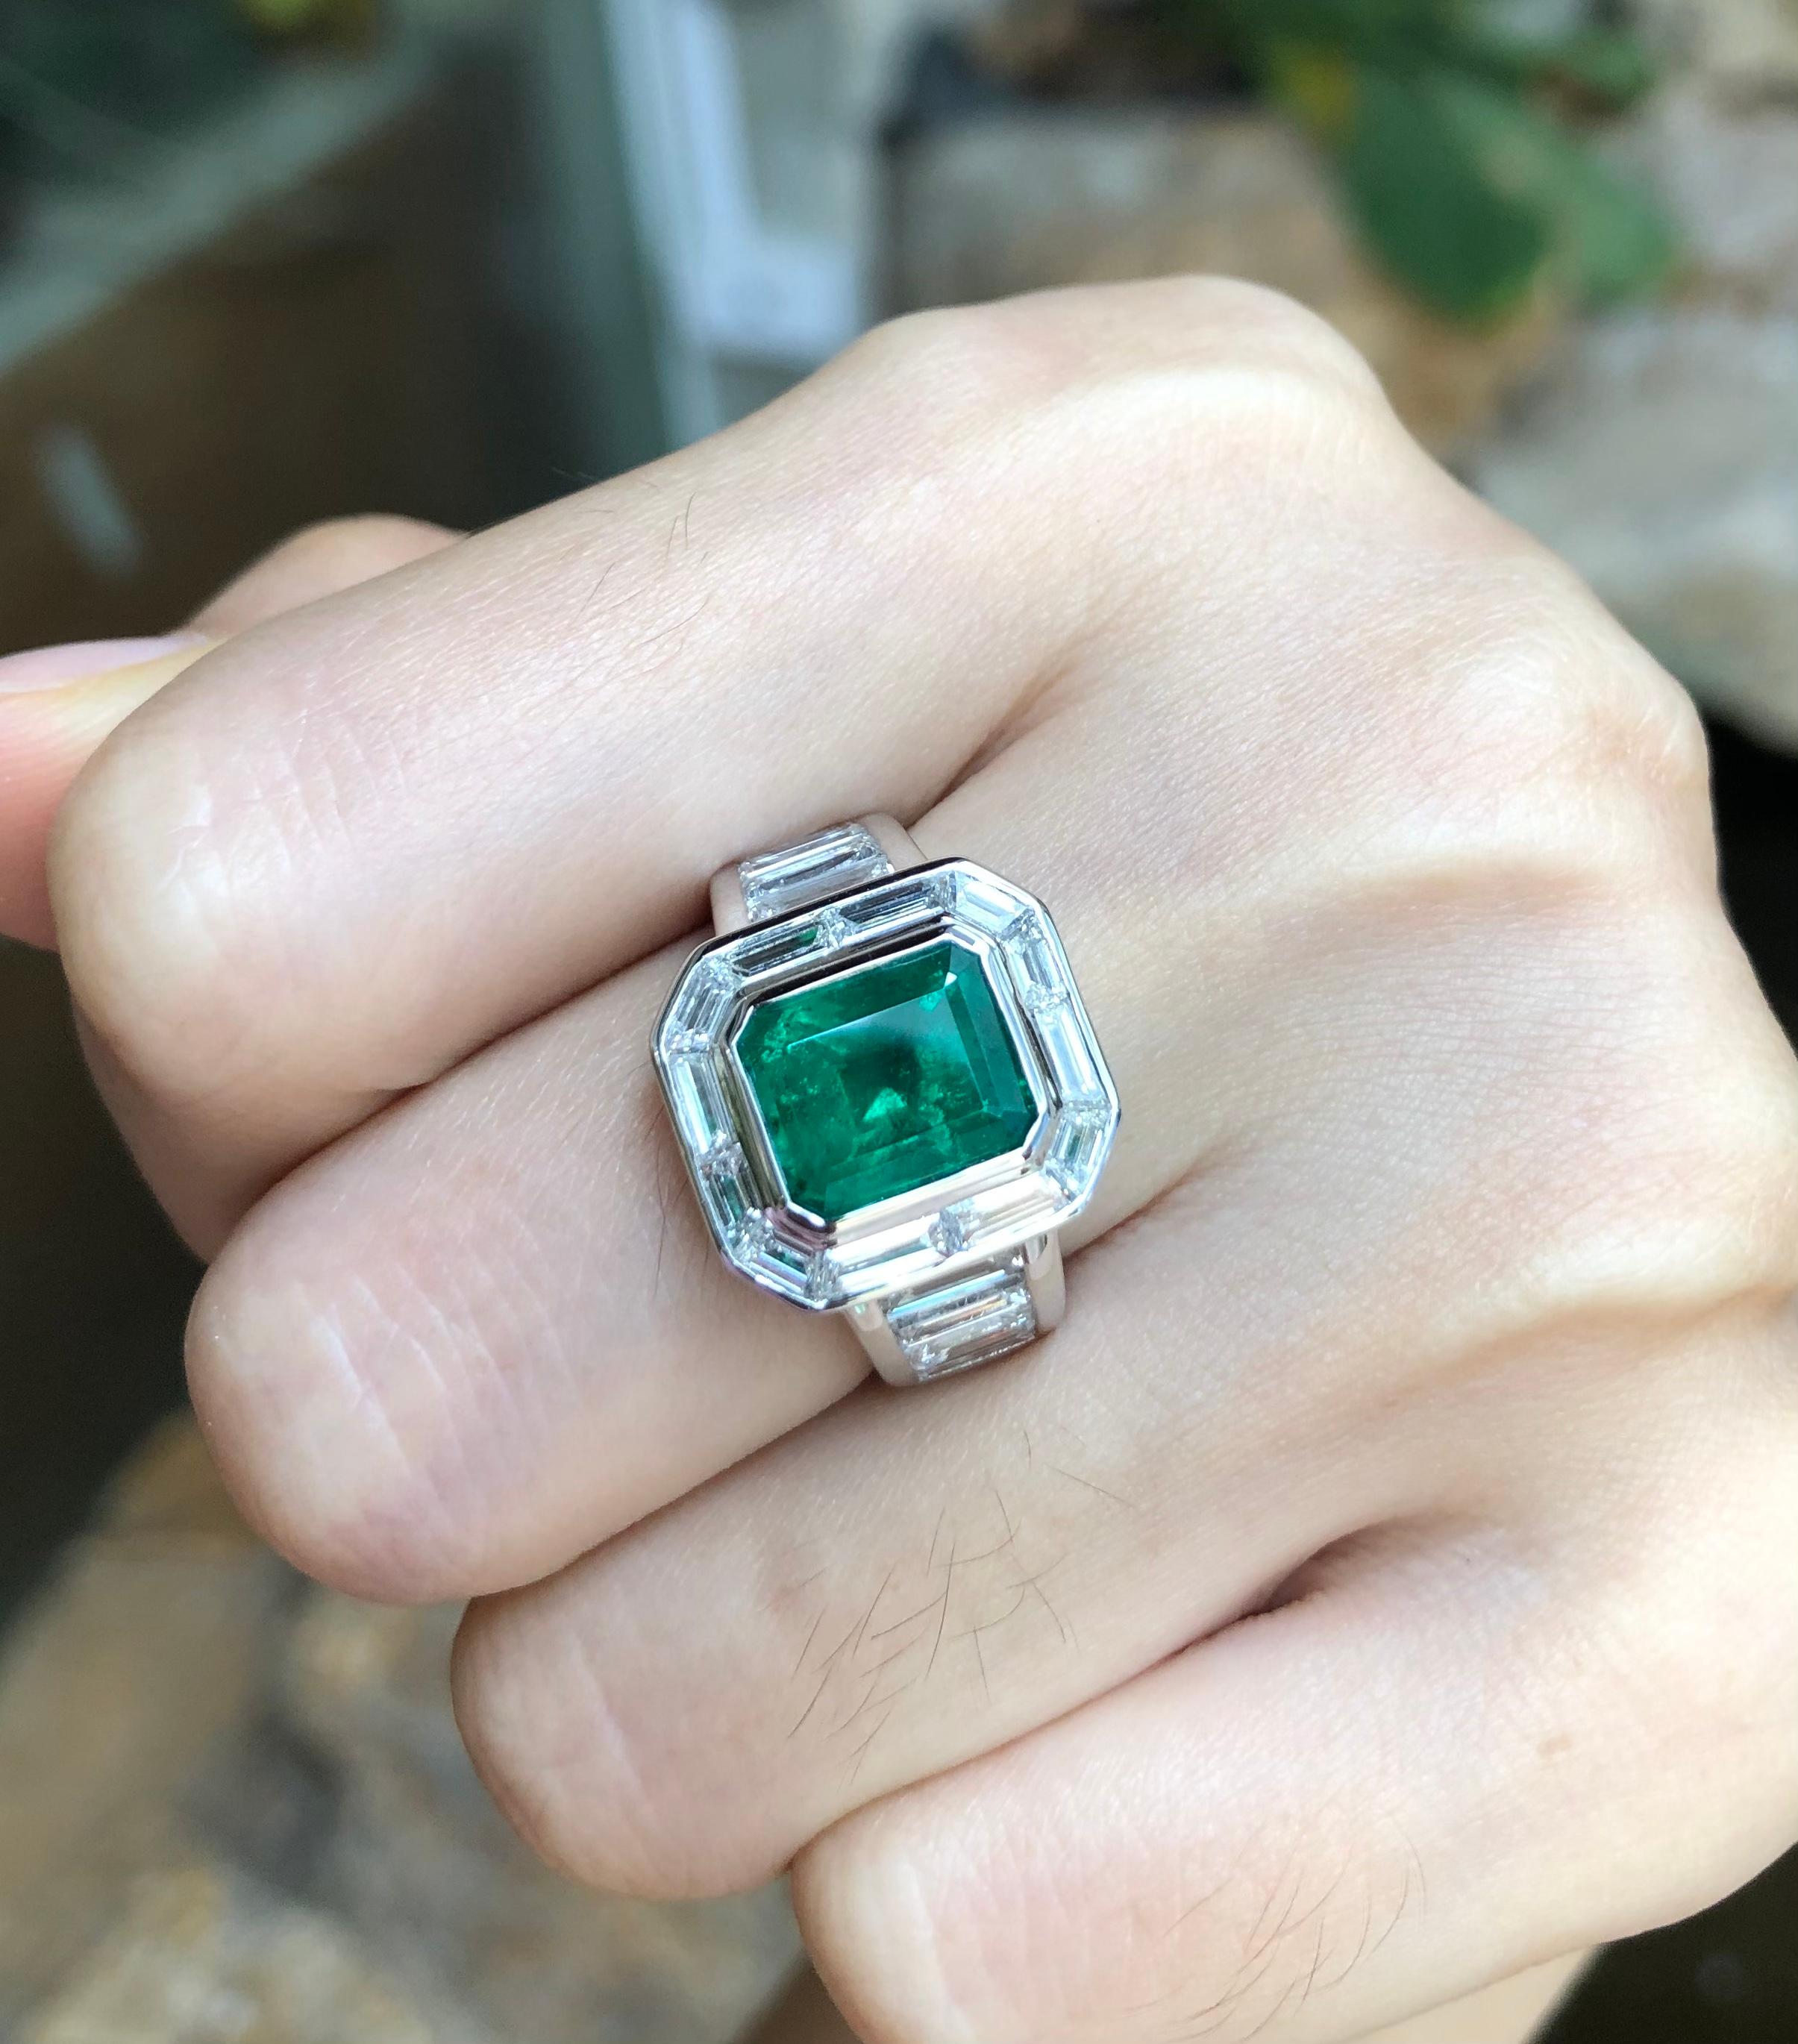 Emerald 2.68 carats with Diamond 2.75 carats Ring set in 18 Karat White Gold Settings

Width:  1.3 cm 
Length:  1.4 cm
Ring Size: 52
Total Weight: 12.21 grams

